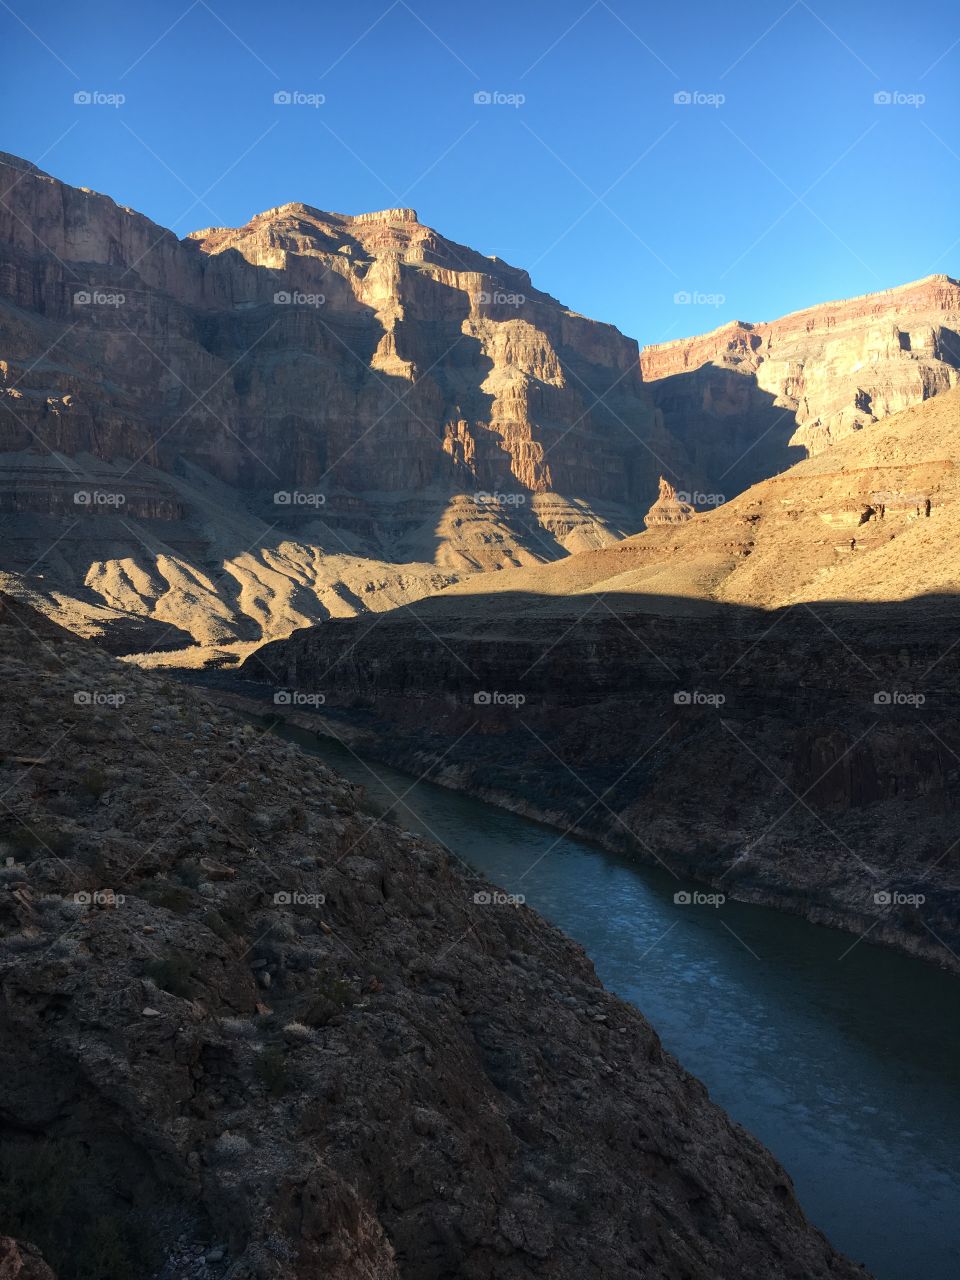 Bottom of the Grand Canyon with river